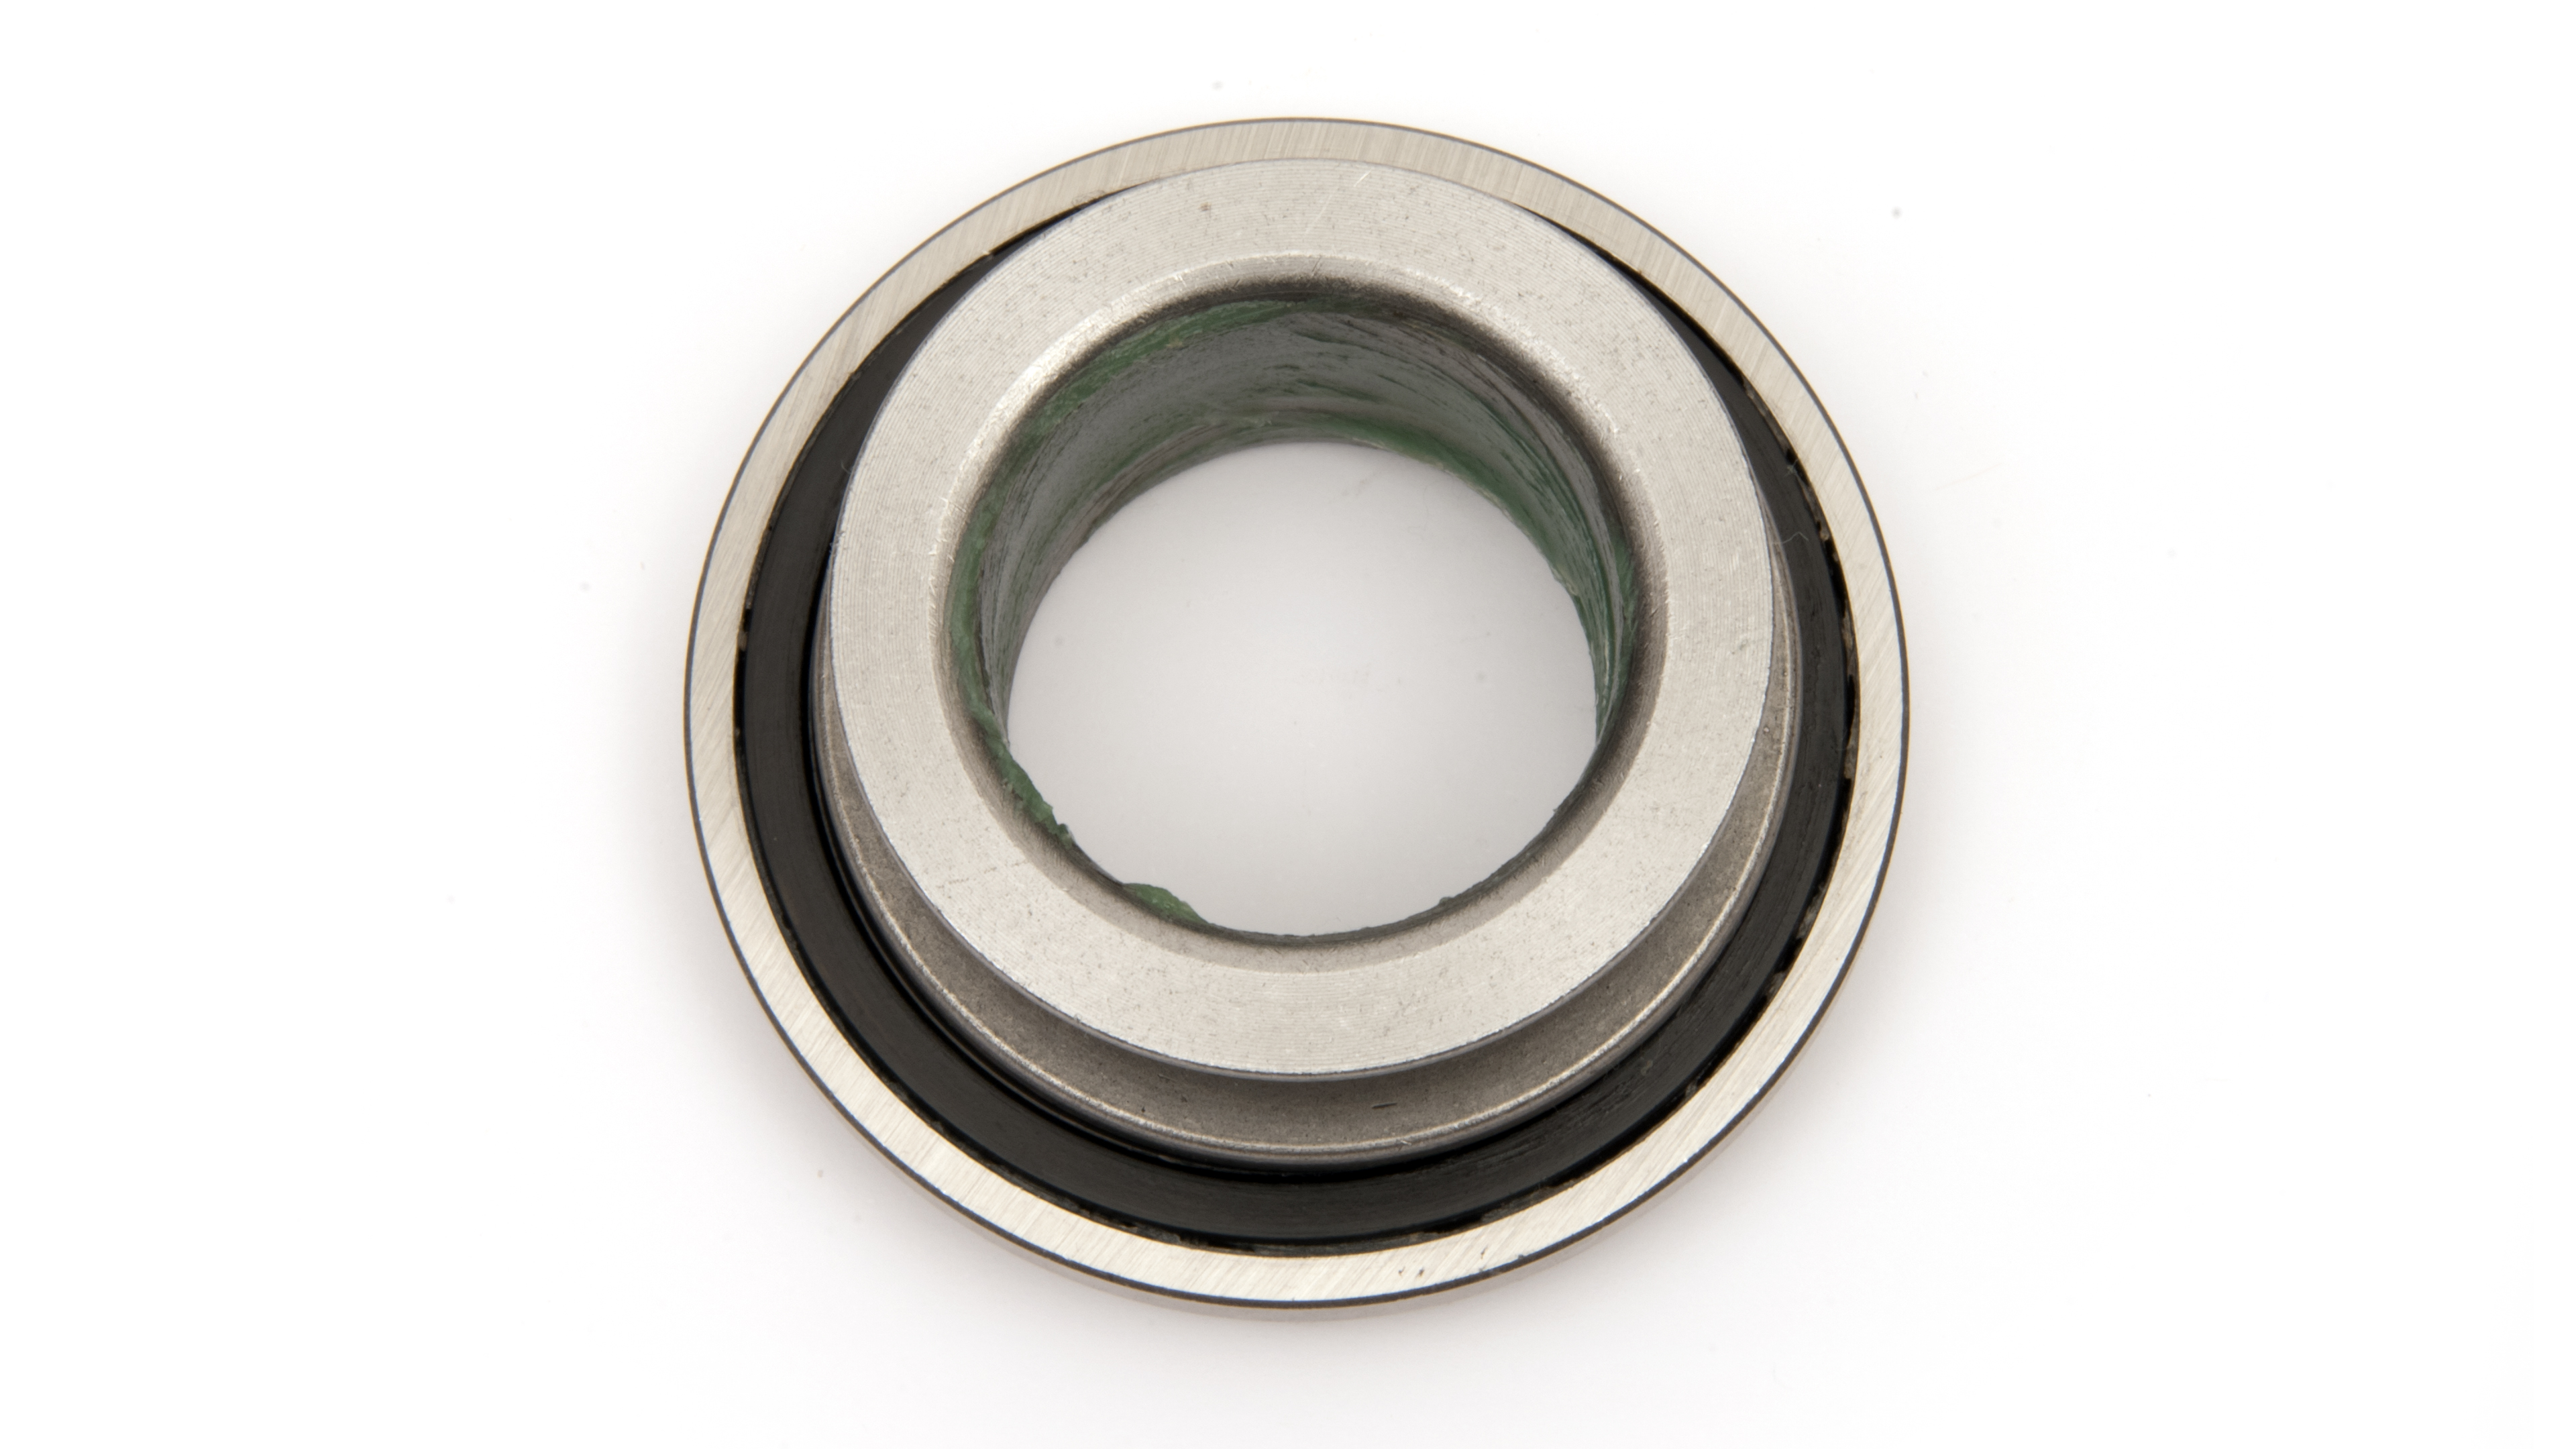 1985-1988 Chevrolet Corvette  Centerforce  Accessories, Throw Out Bearing / Clutch Release Bearing